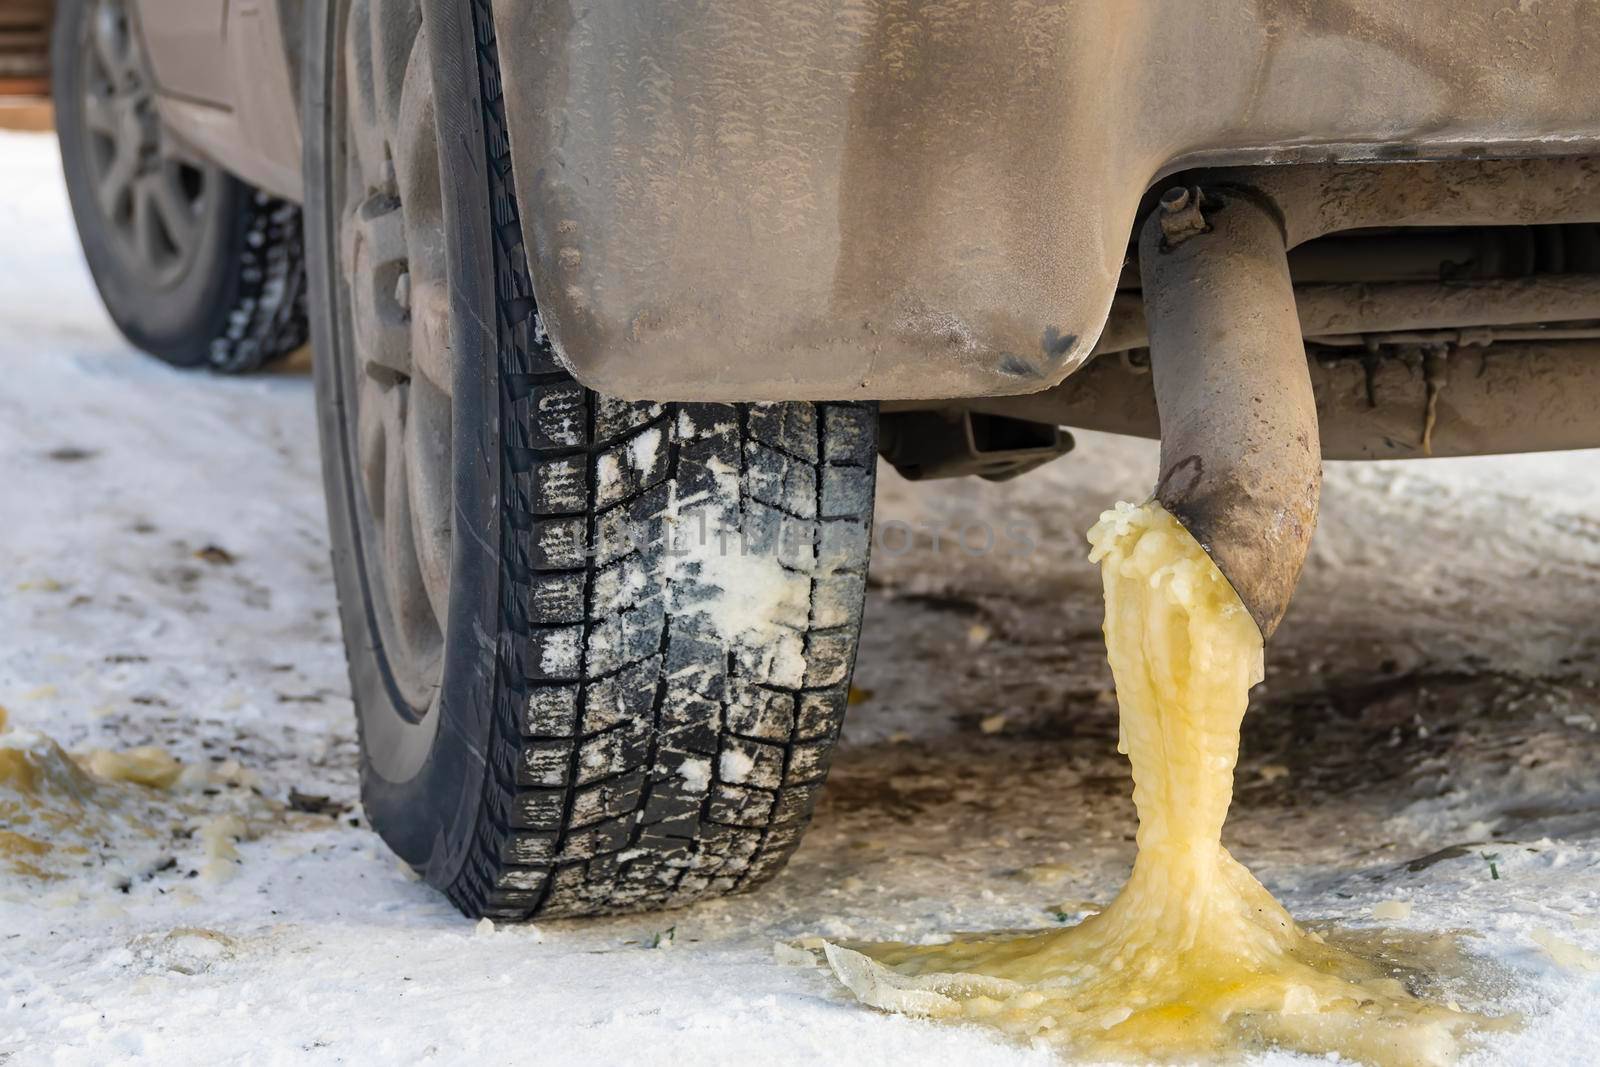 frozen yellow water condensate with gasoline from the exhaust pipe of a car on the snow in the cold winter season